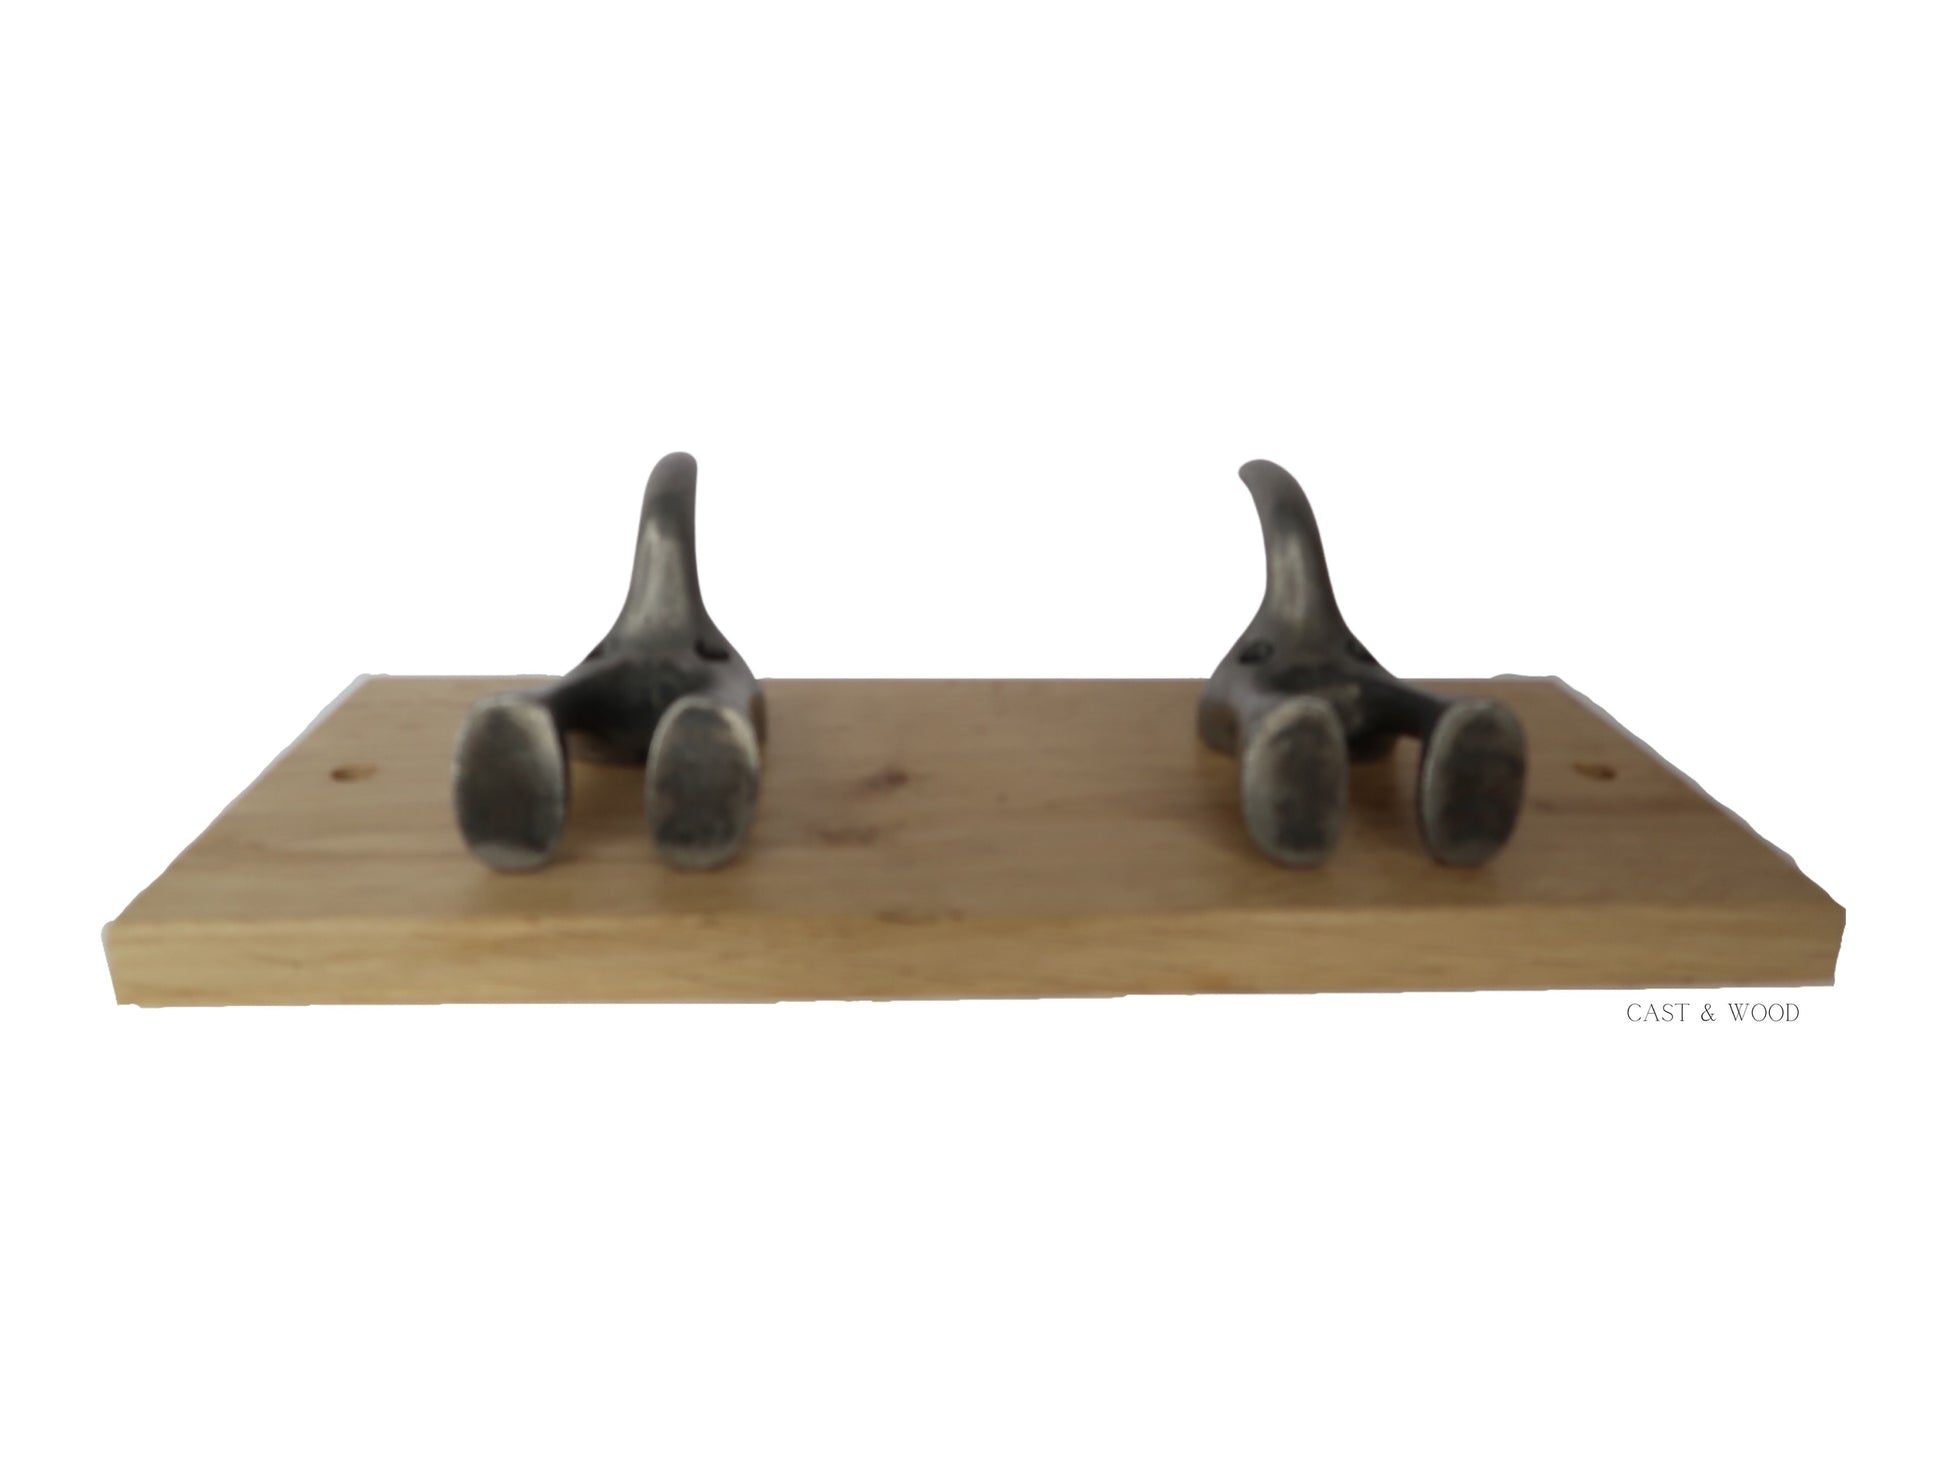 Solid Oak Mounted Dog Tail Hook - Double